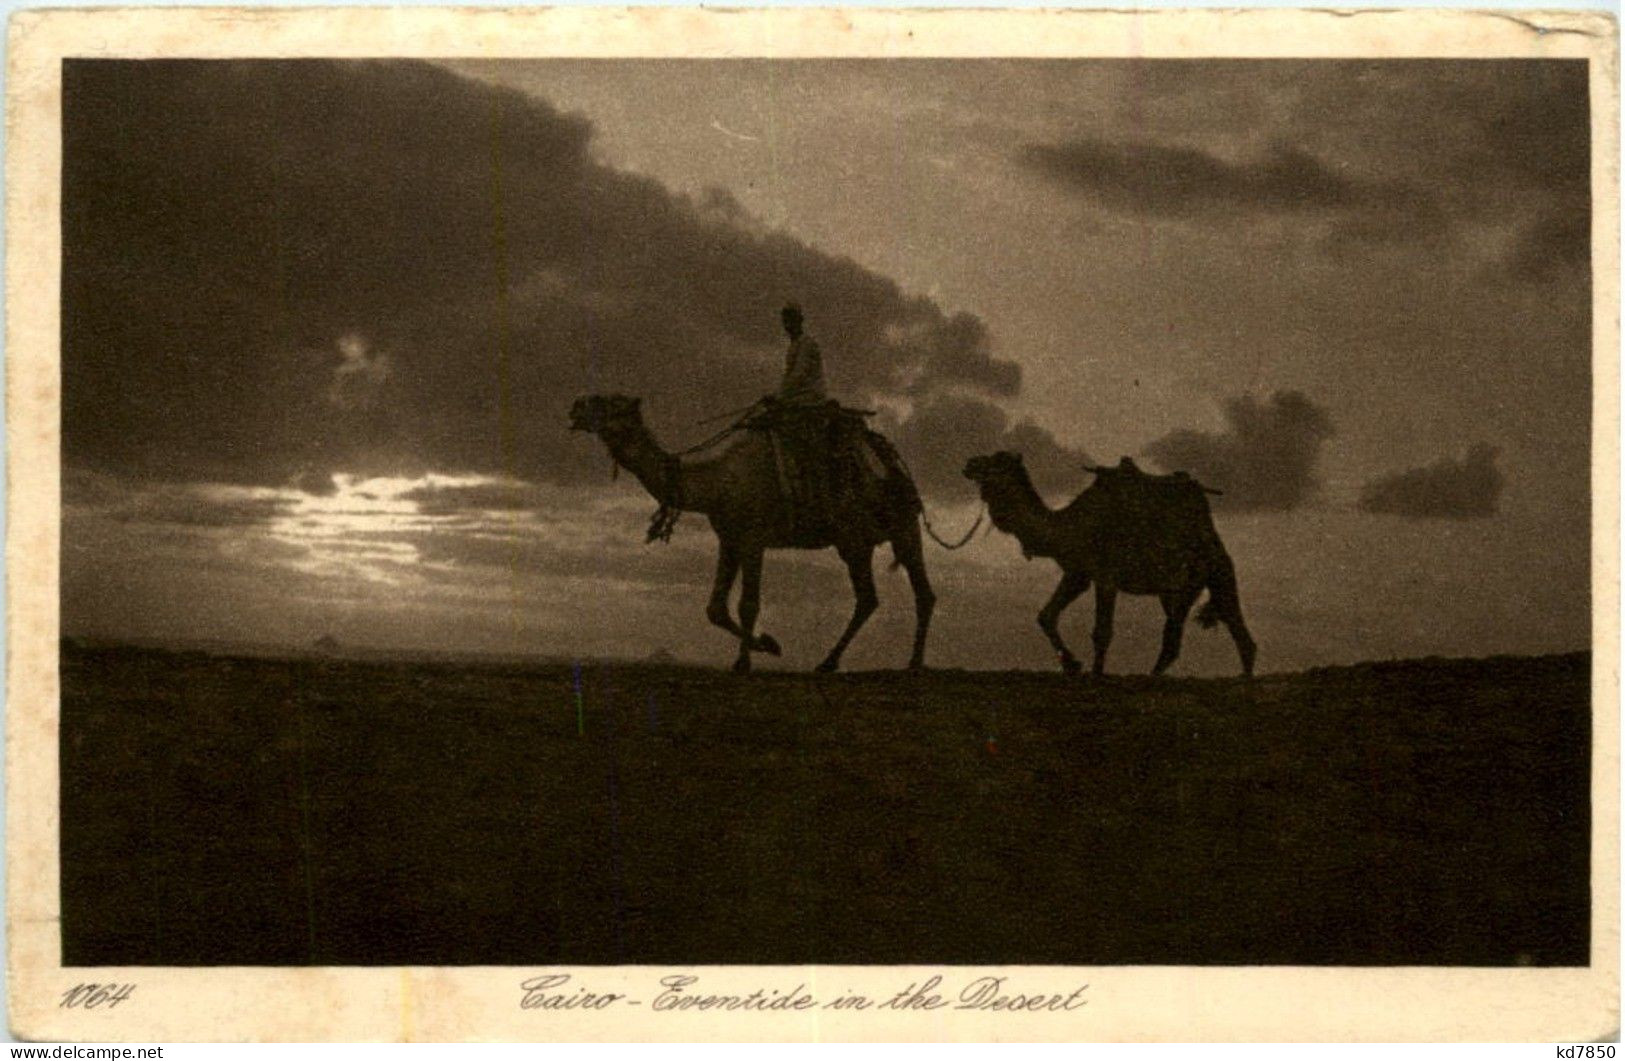 Cairo - Eventide In The Desert - Le Caire